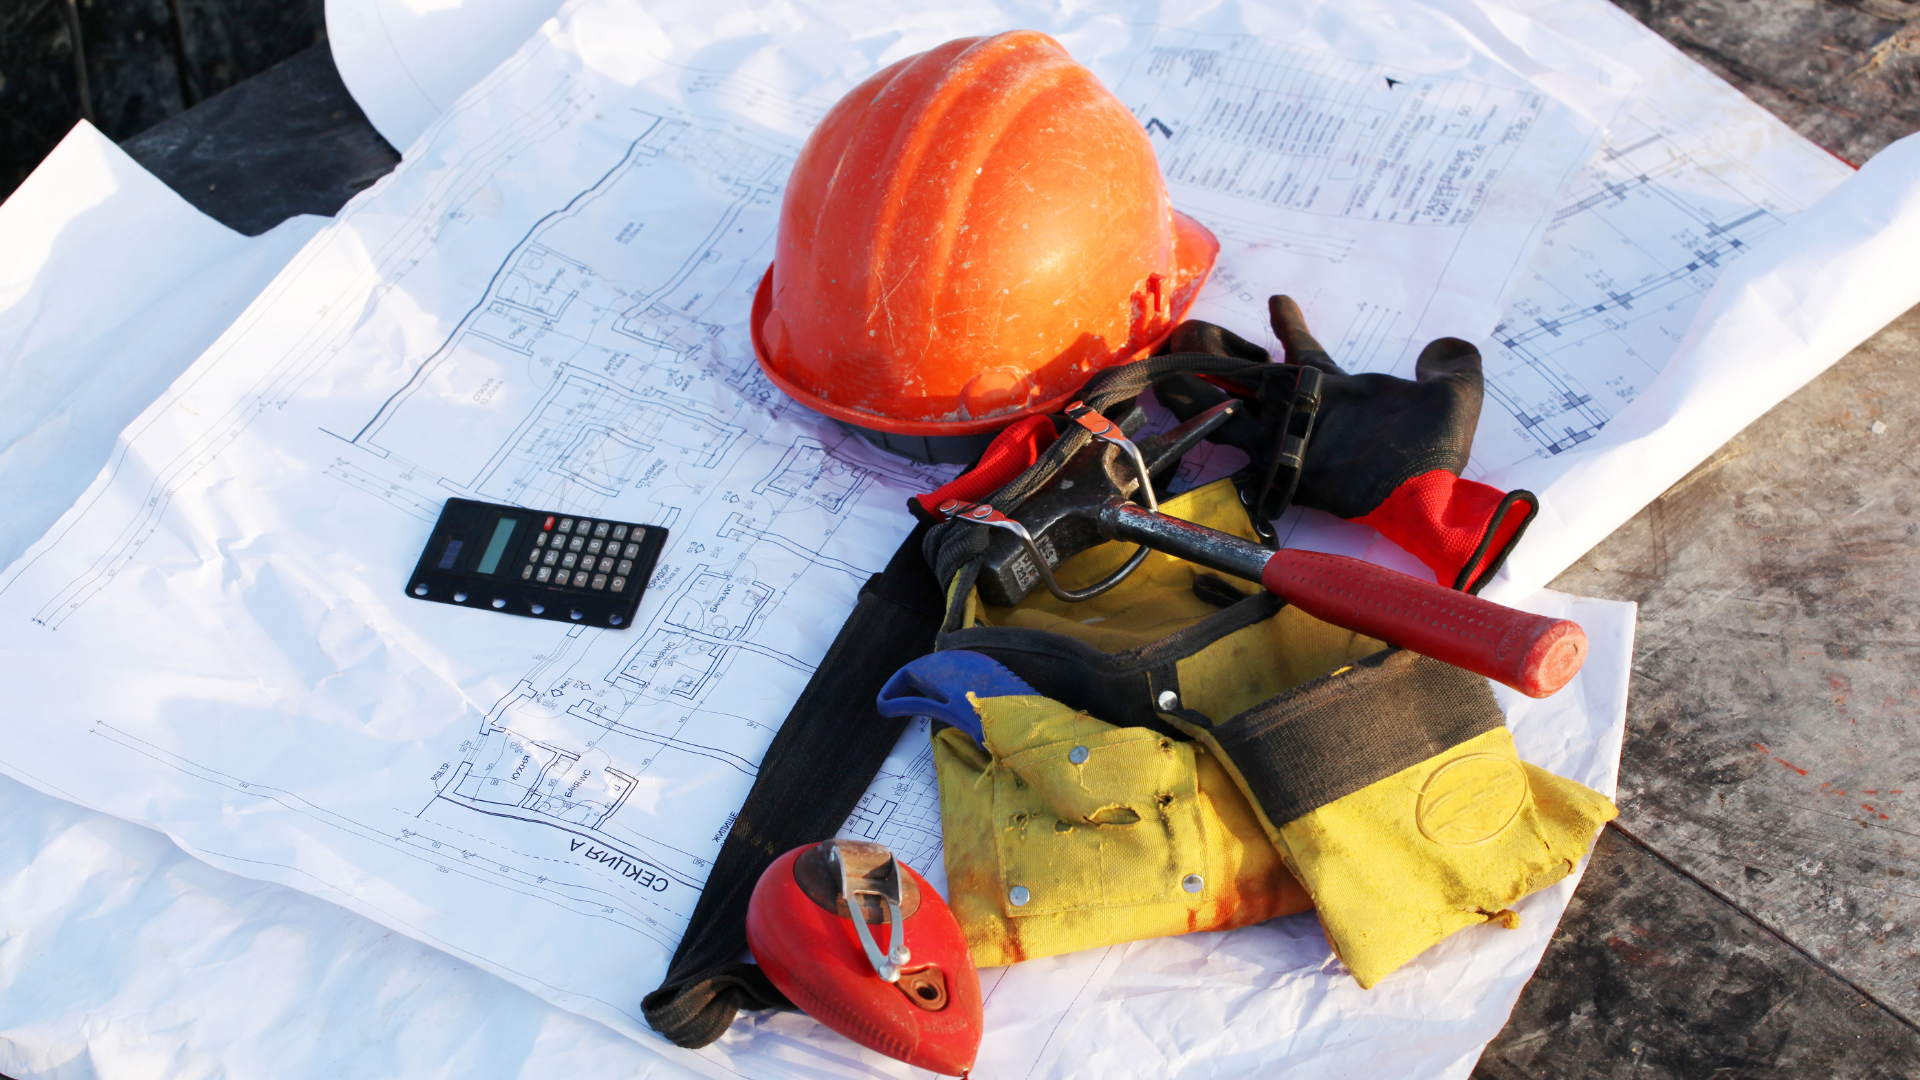 concrete construction planning with construction tools